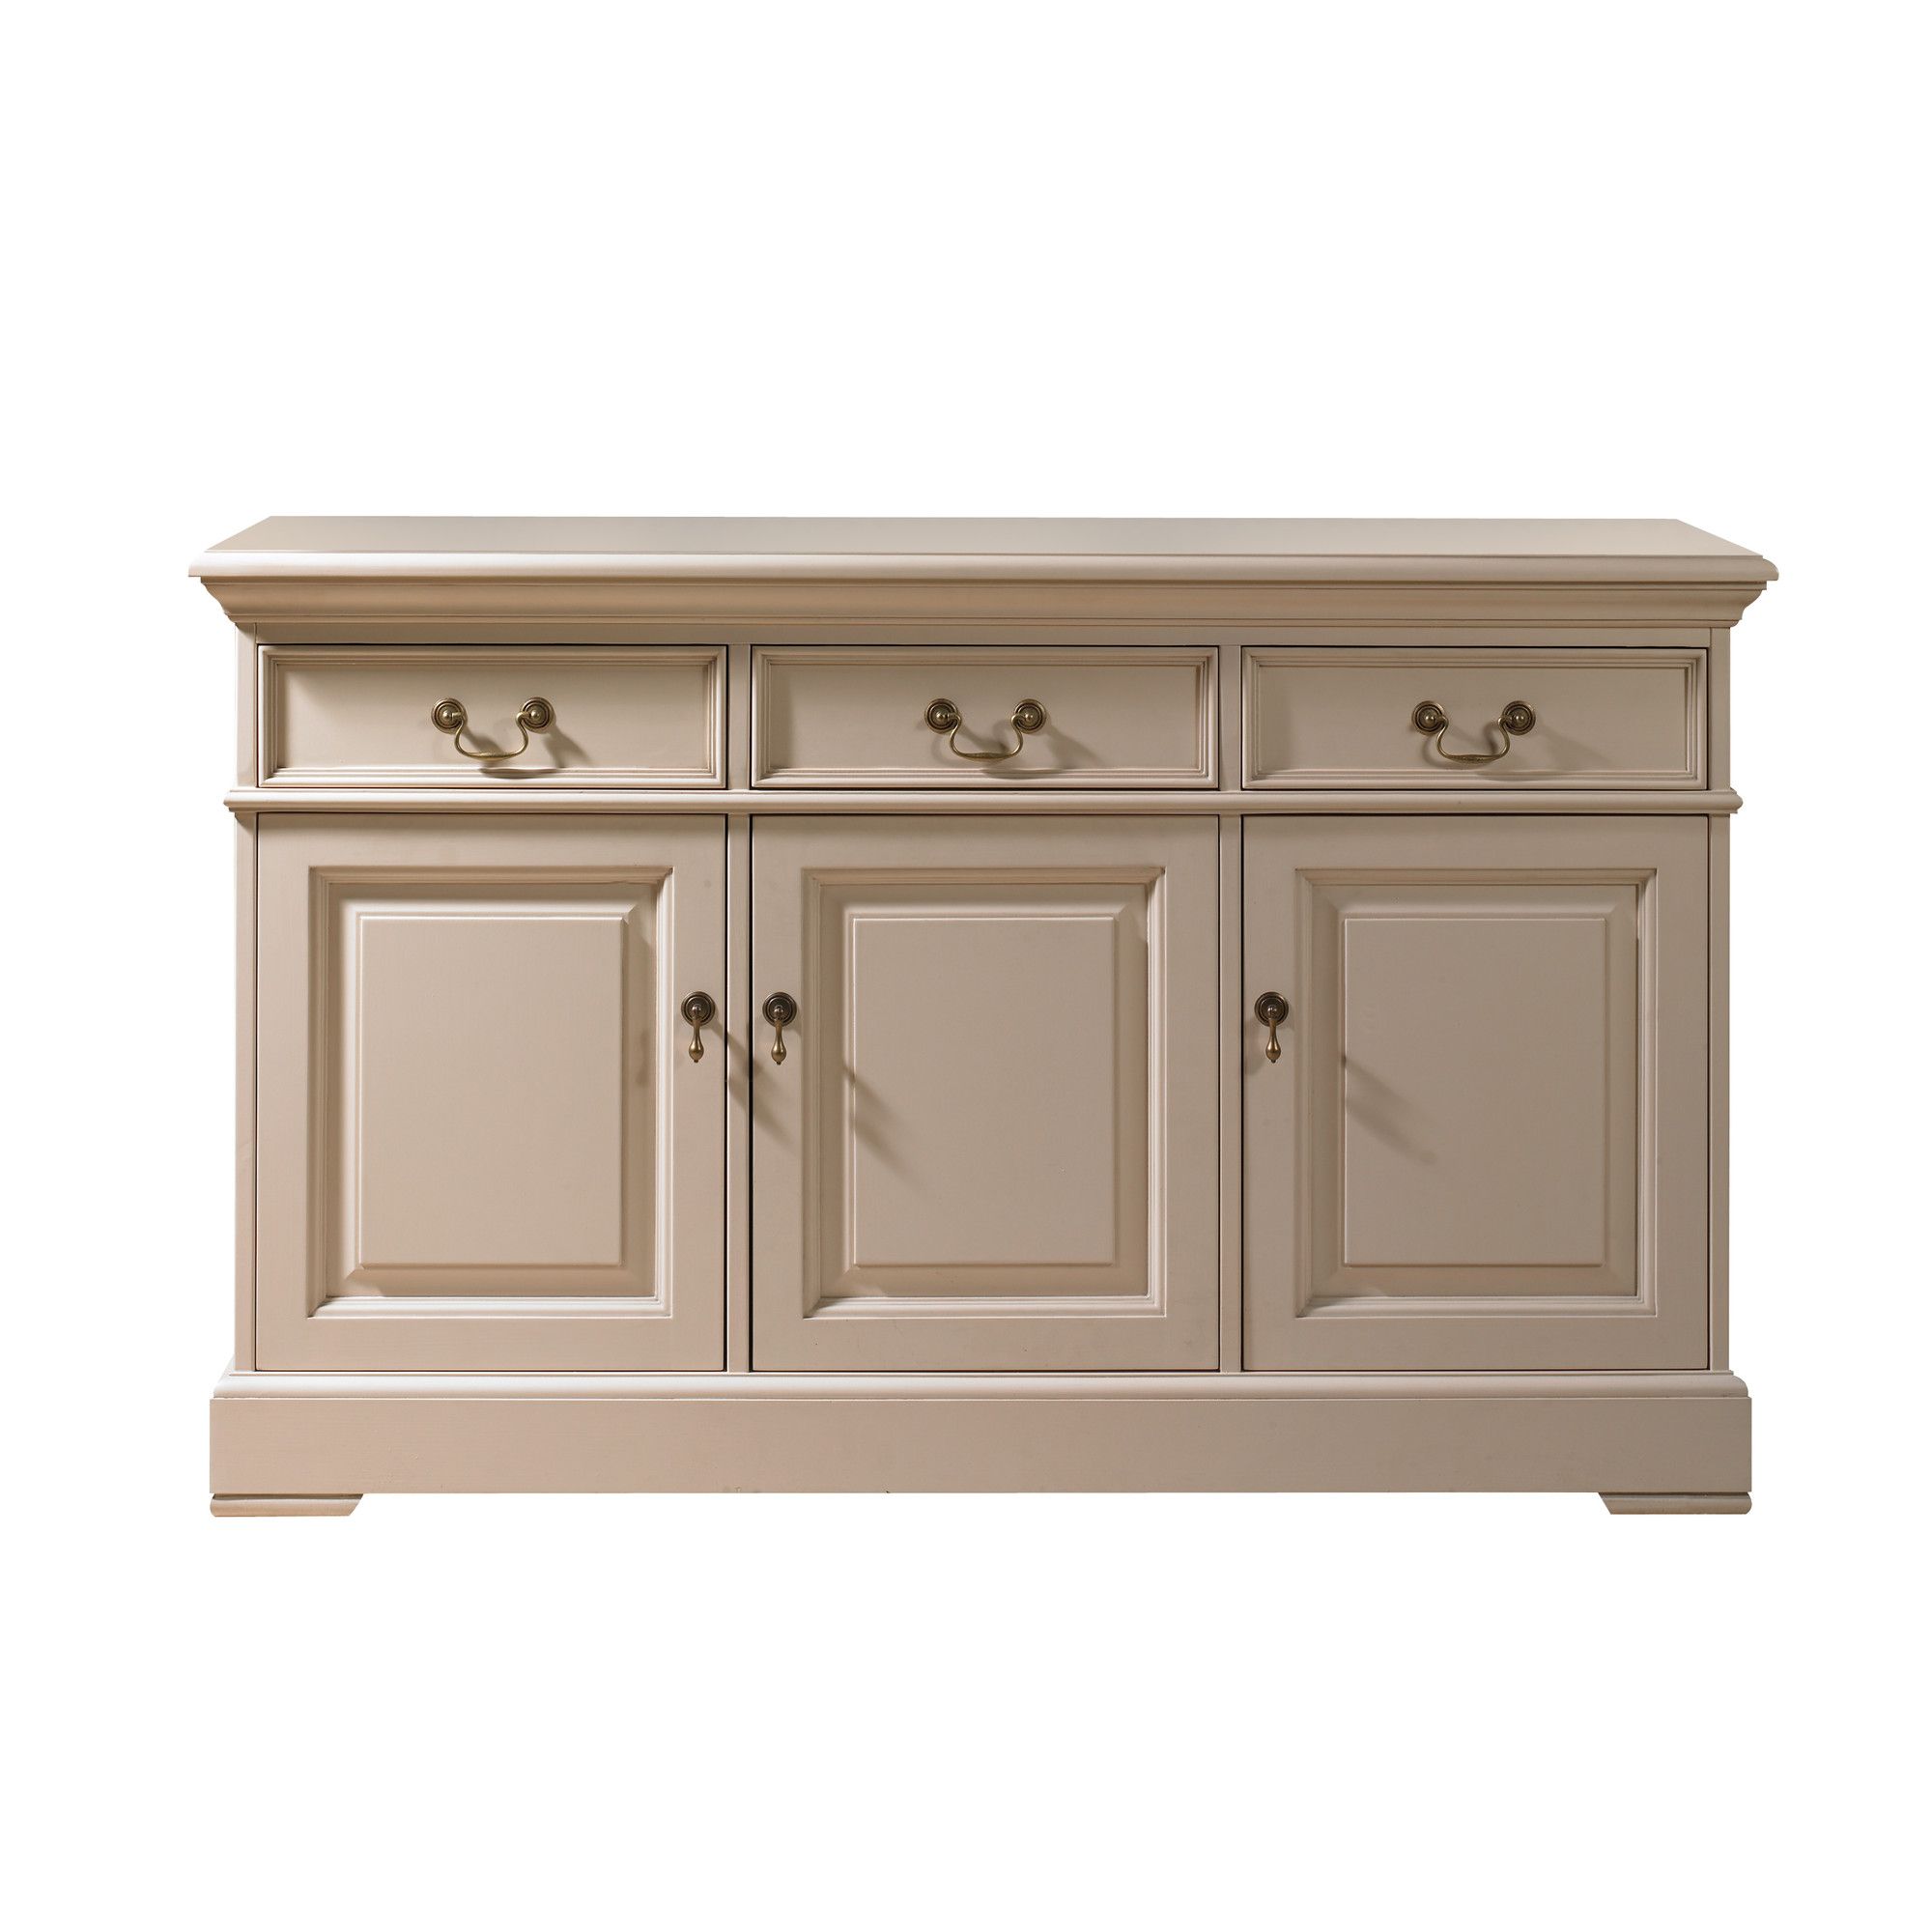 YP Furniture Country House Three Door Sideboard - Ivory at Tesco Direct